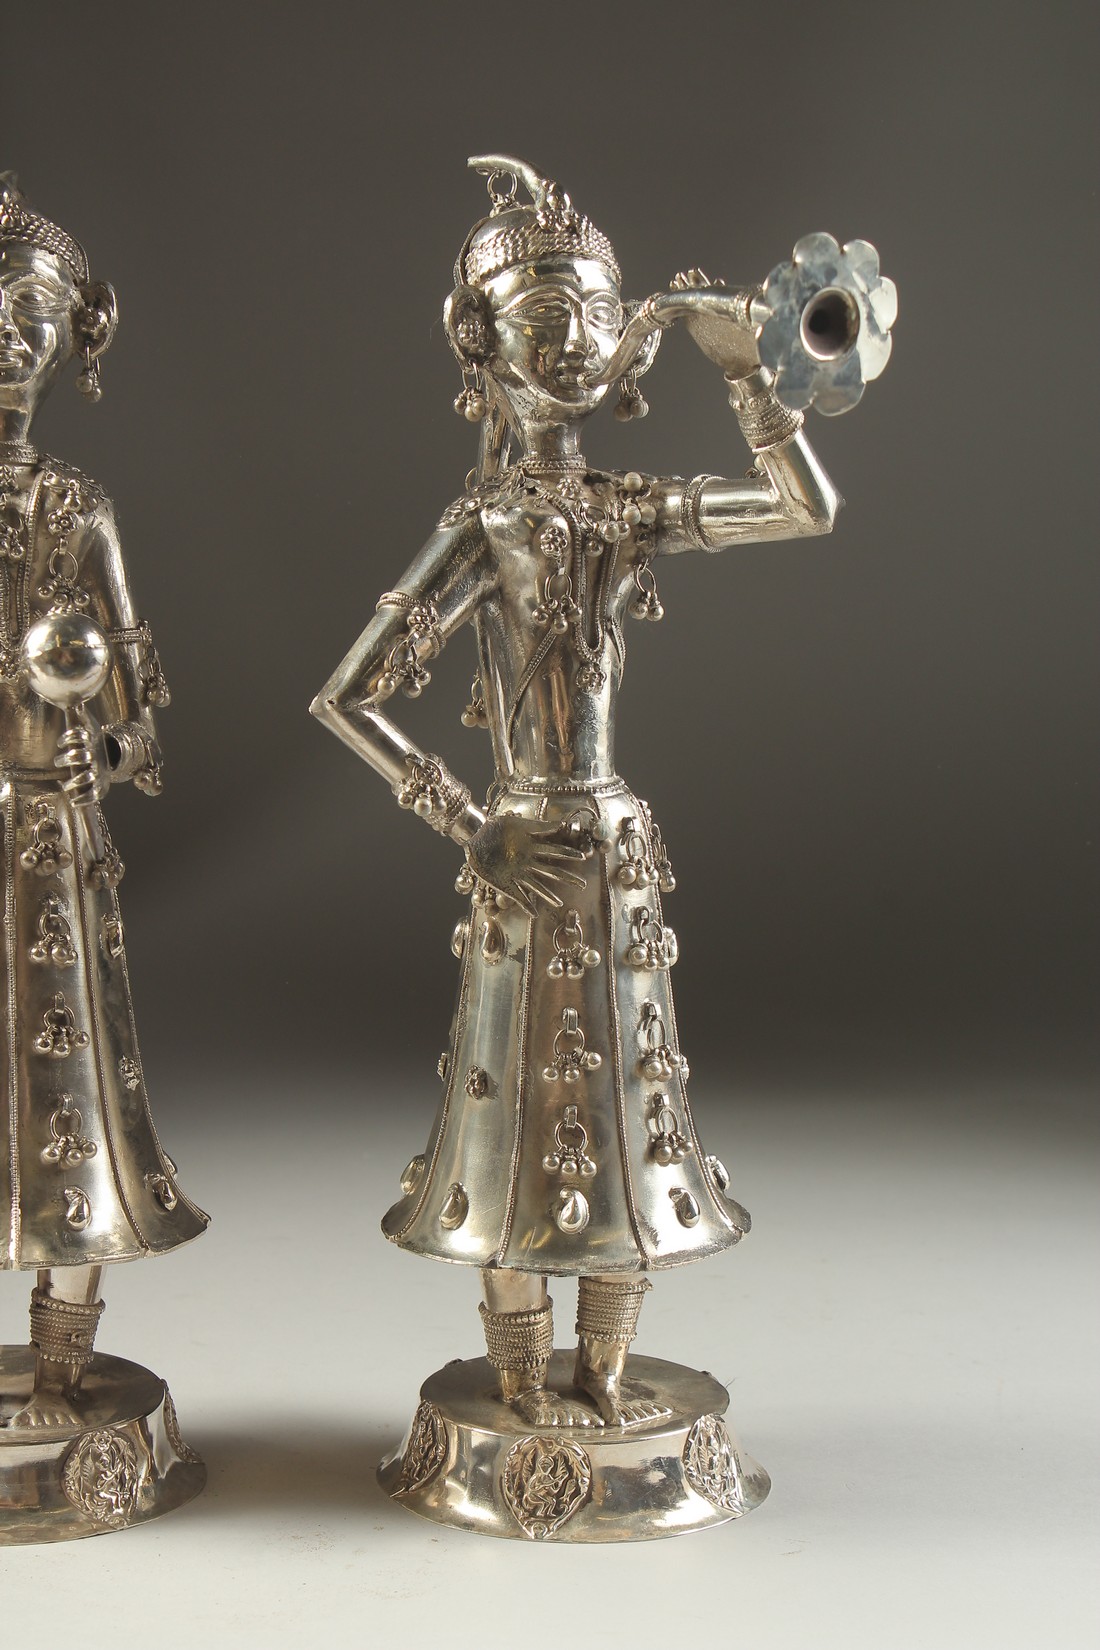 A FINE PAIR OF 19TH CENTURY INDIAN SILVER FIGURES OF MUSICIANS, 30cm high. - Image 3 of 11